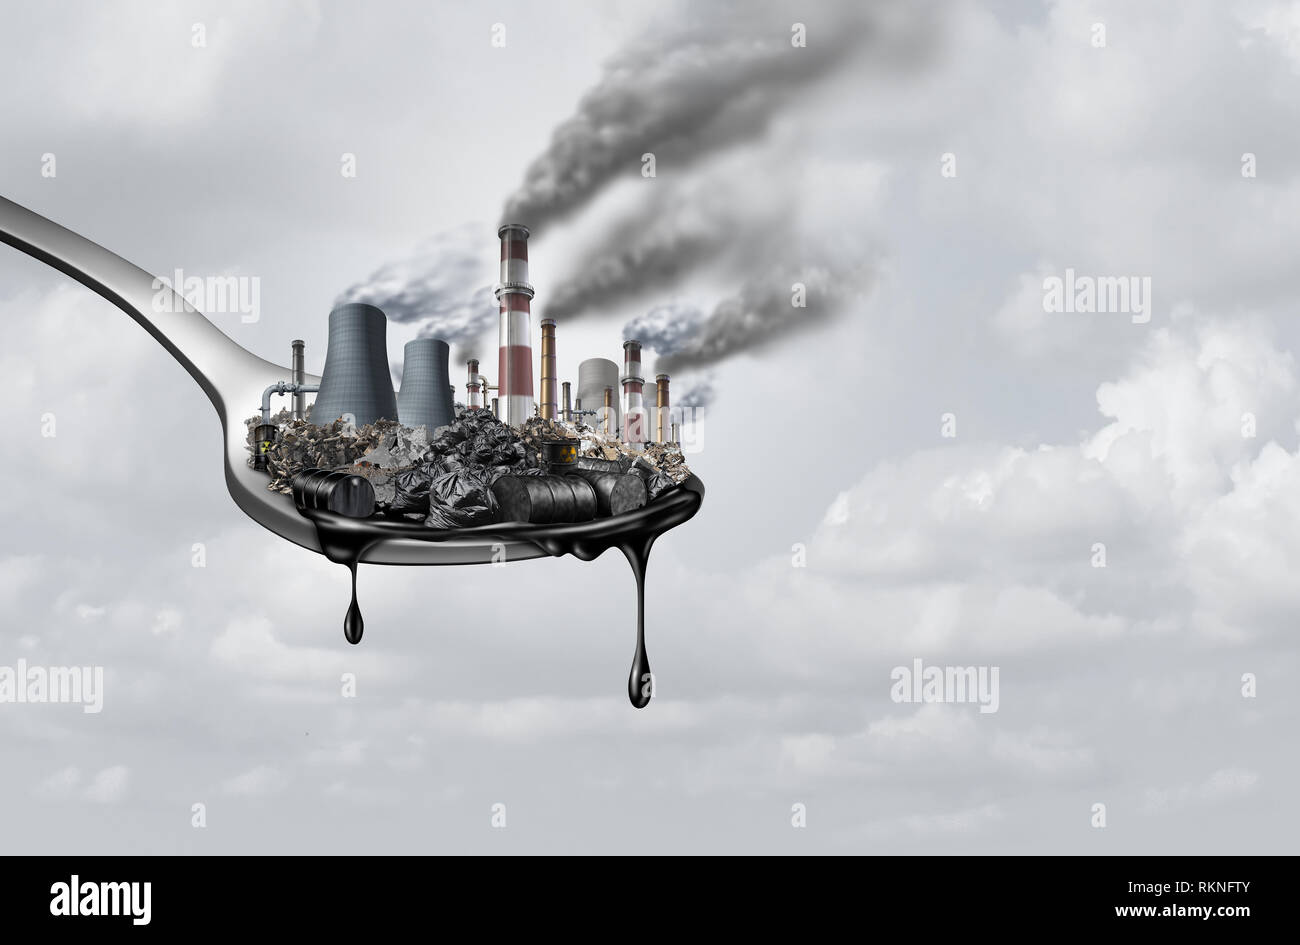 Pollution in food and toxic chemical contaminants that people ingest as a health and safety concept as a spoon. Stock Photo